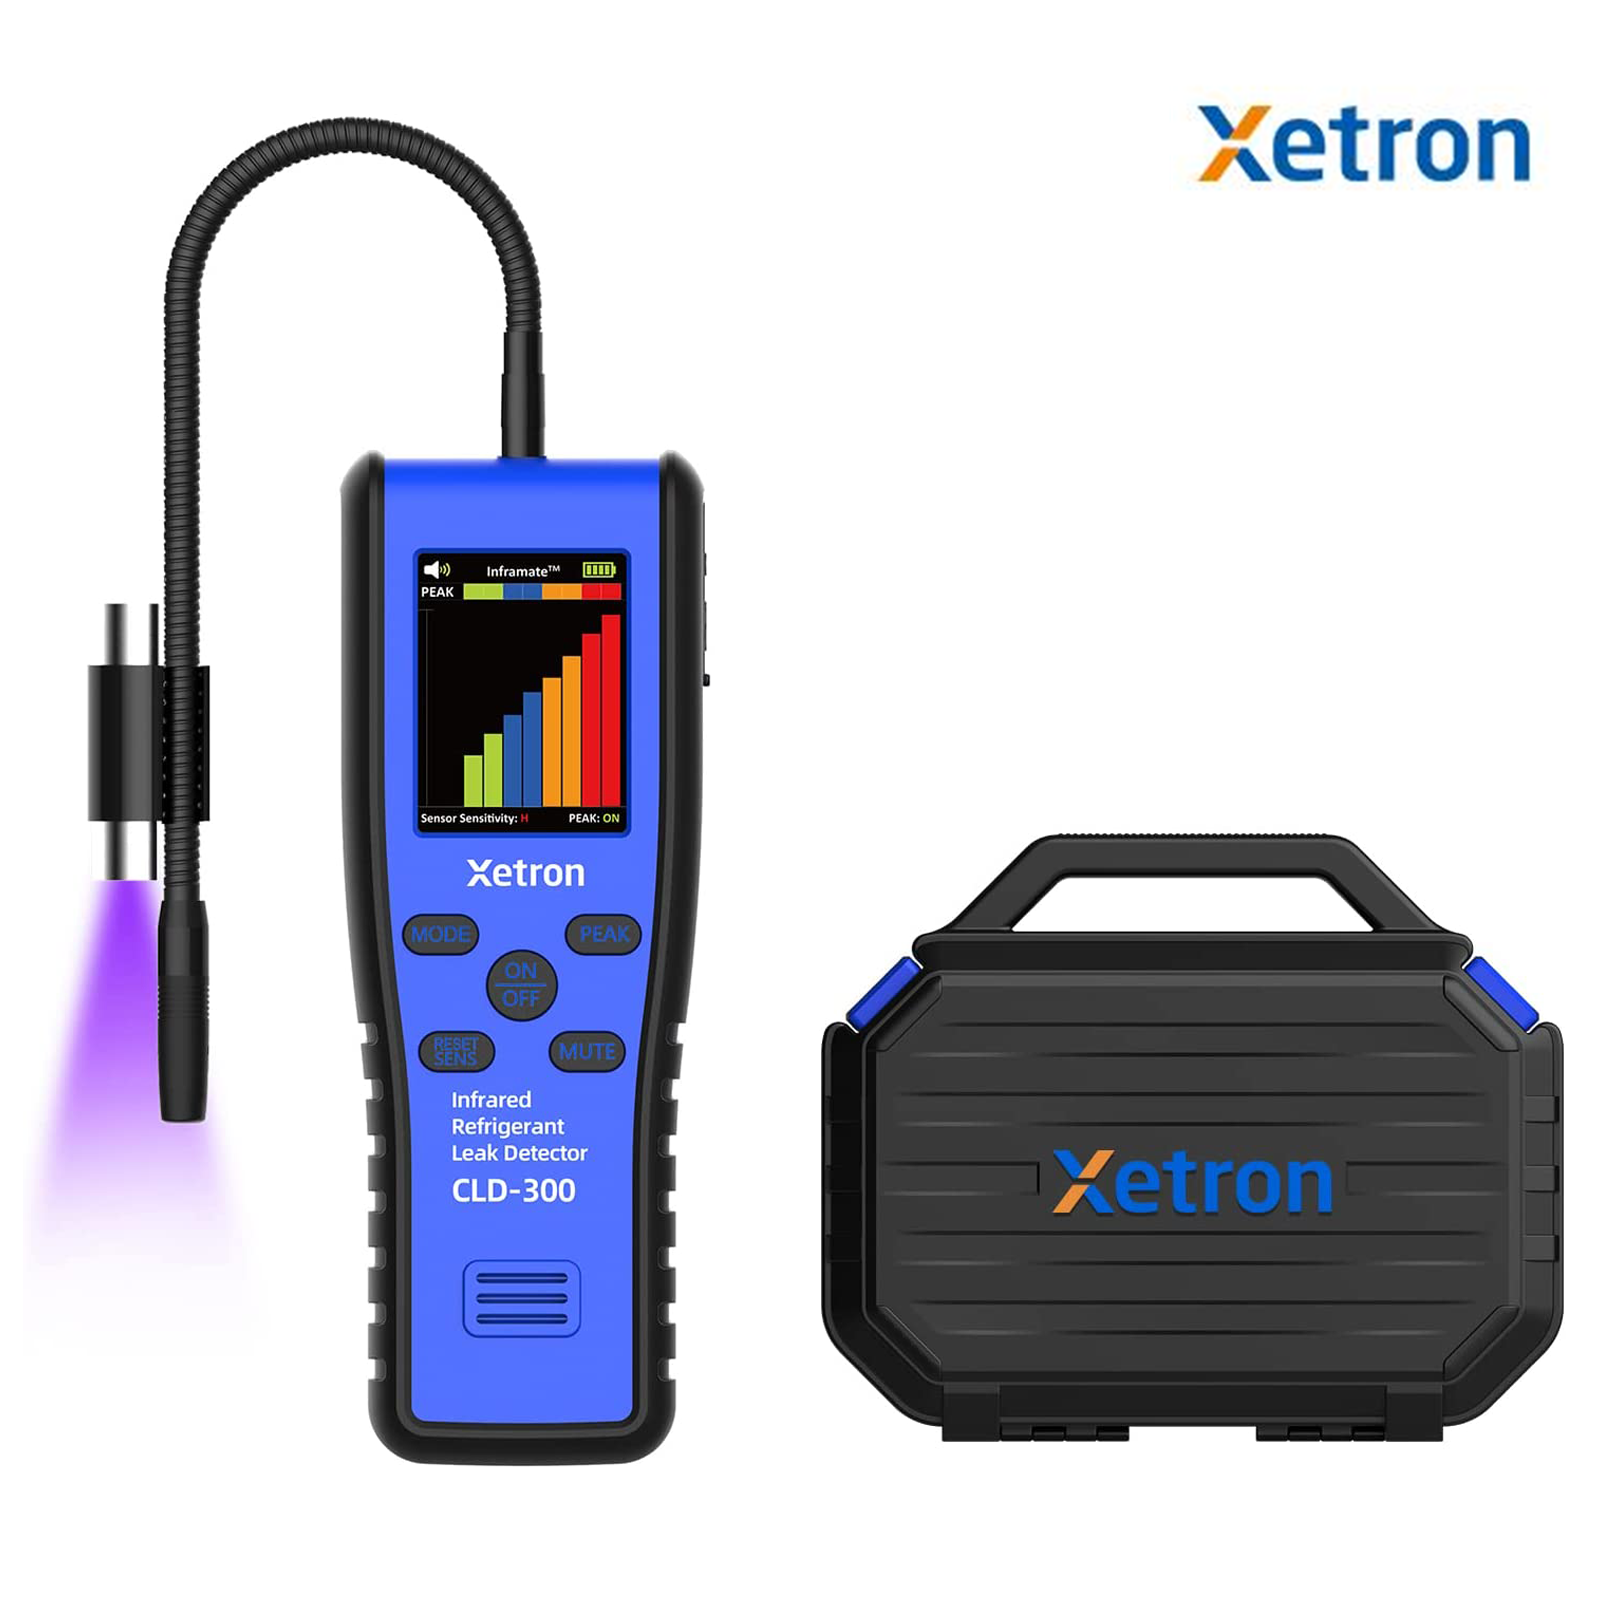 Xetron CLD-300 Infrared Anti-interference Refrigerant Leak